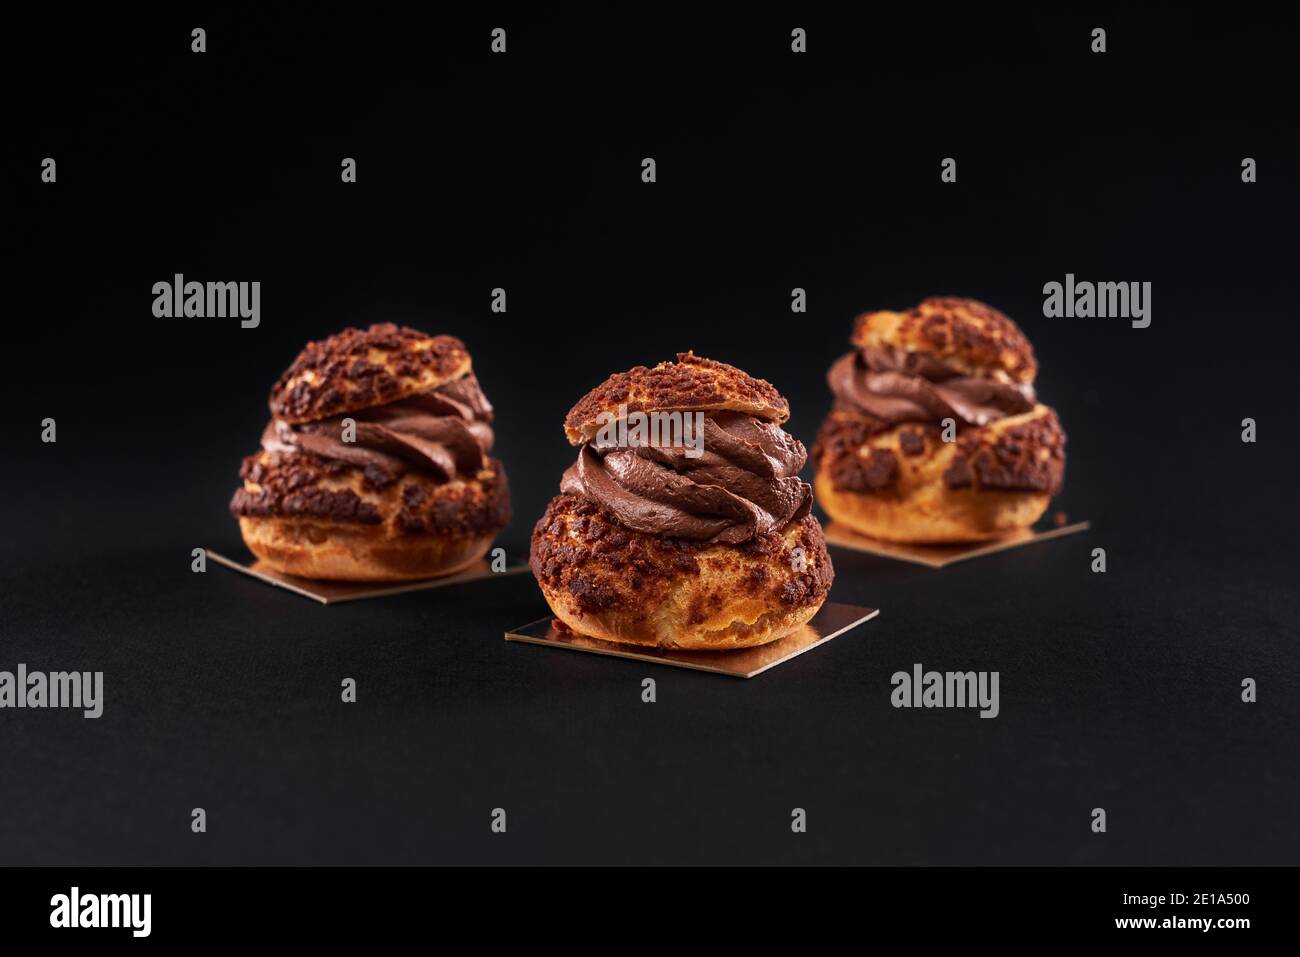 Three delicious fresh crunchy profiteroles with sweet brown chocolate creamy filling. Closeup of homemade tasty baked eclairs isolated on black background. Concept of desserts, restaurant food. Stock Photo